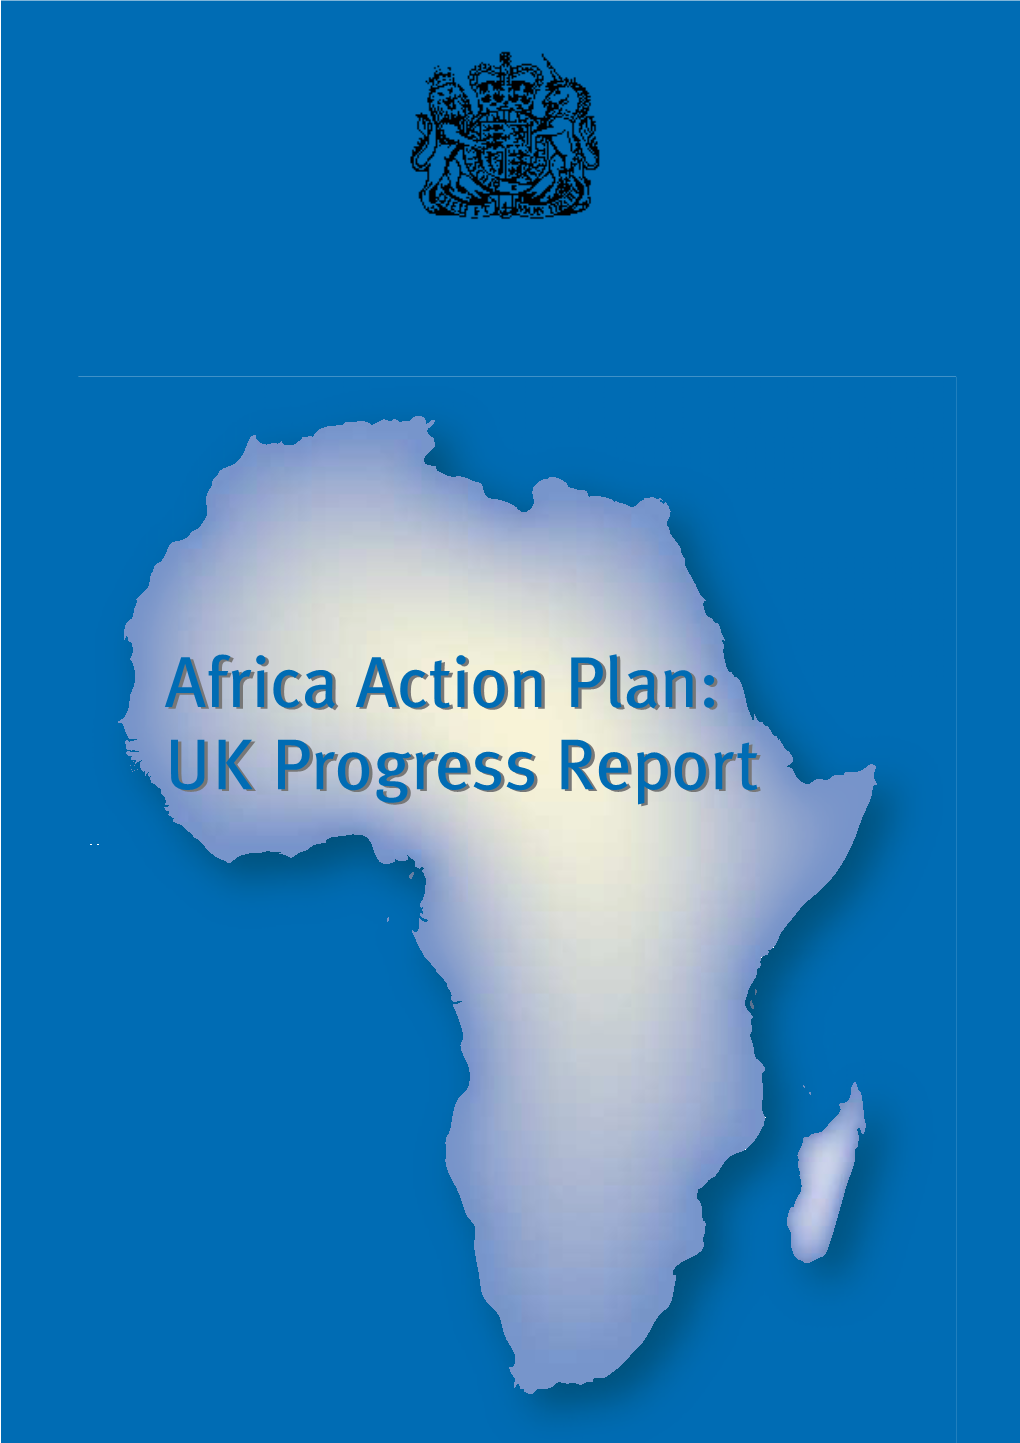 Africa Action Plan